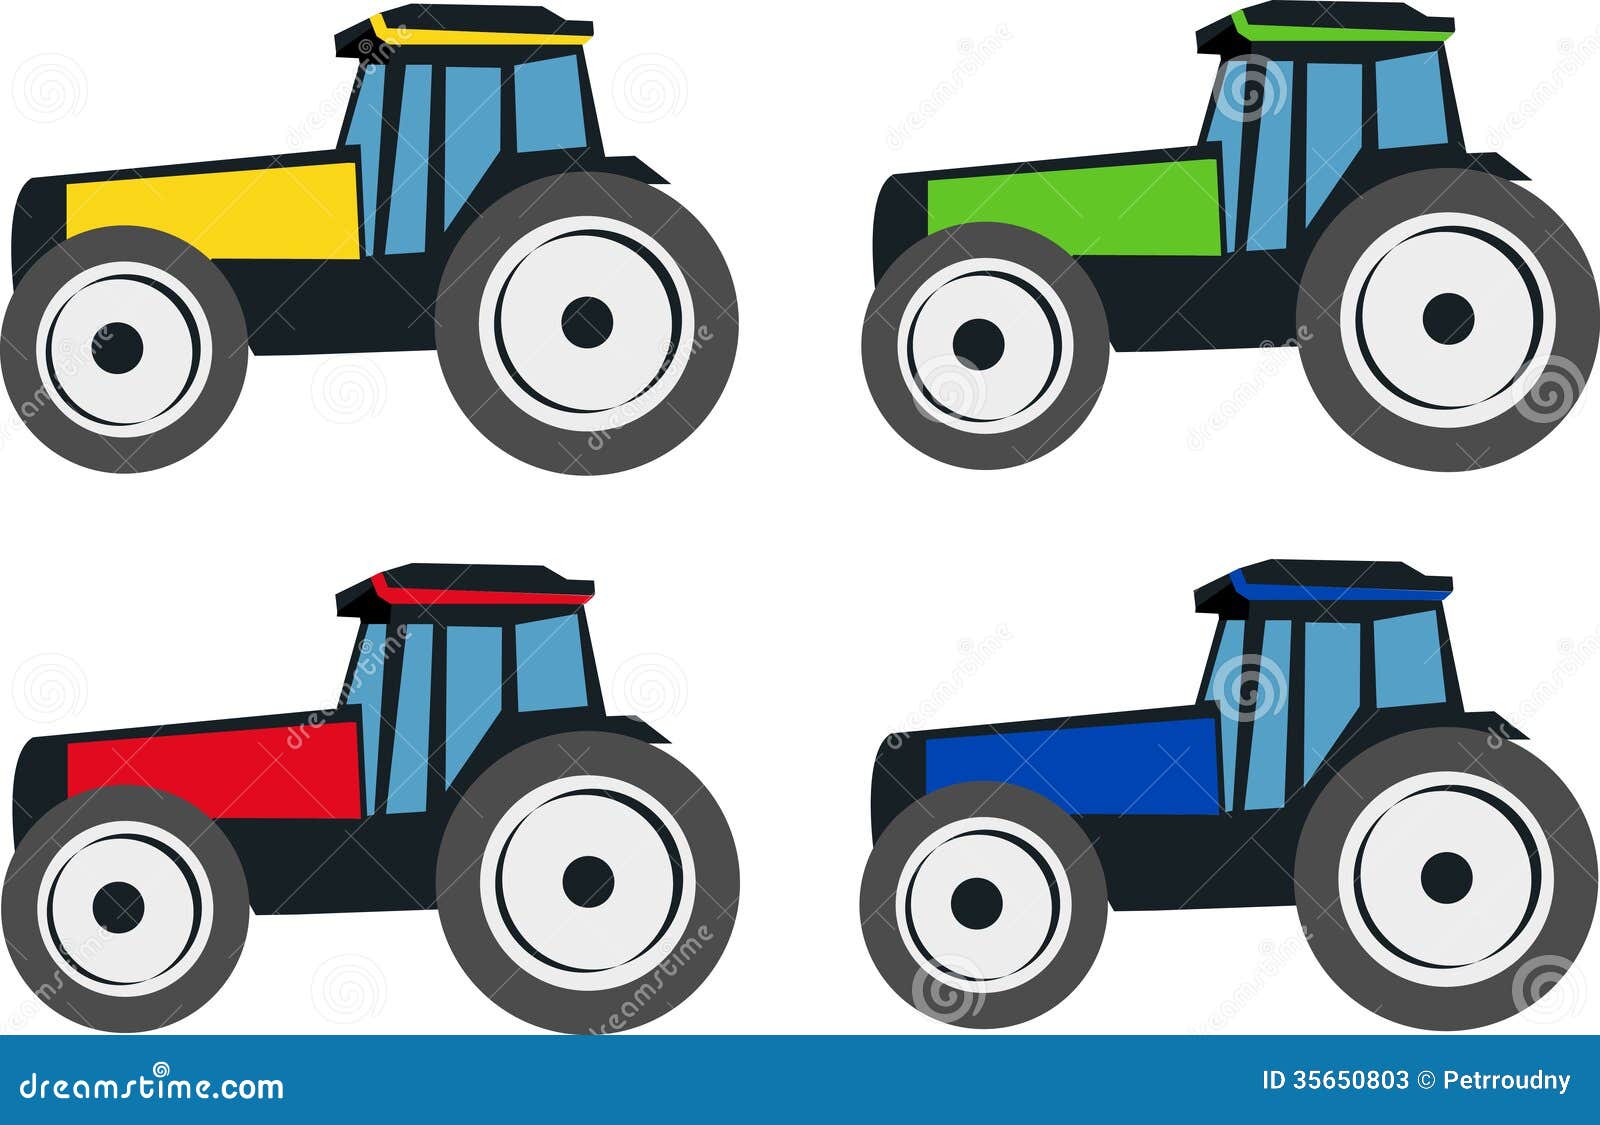 Vector drawing of farm tractor in green color